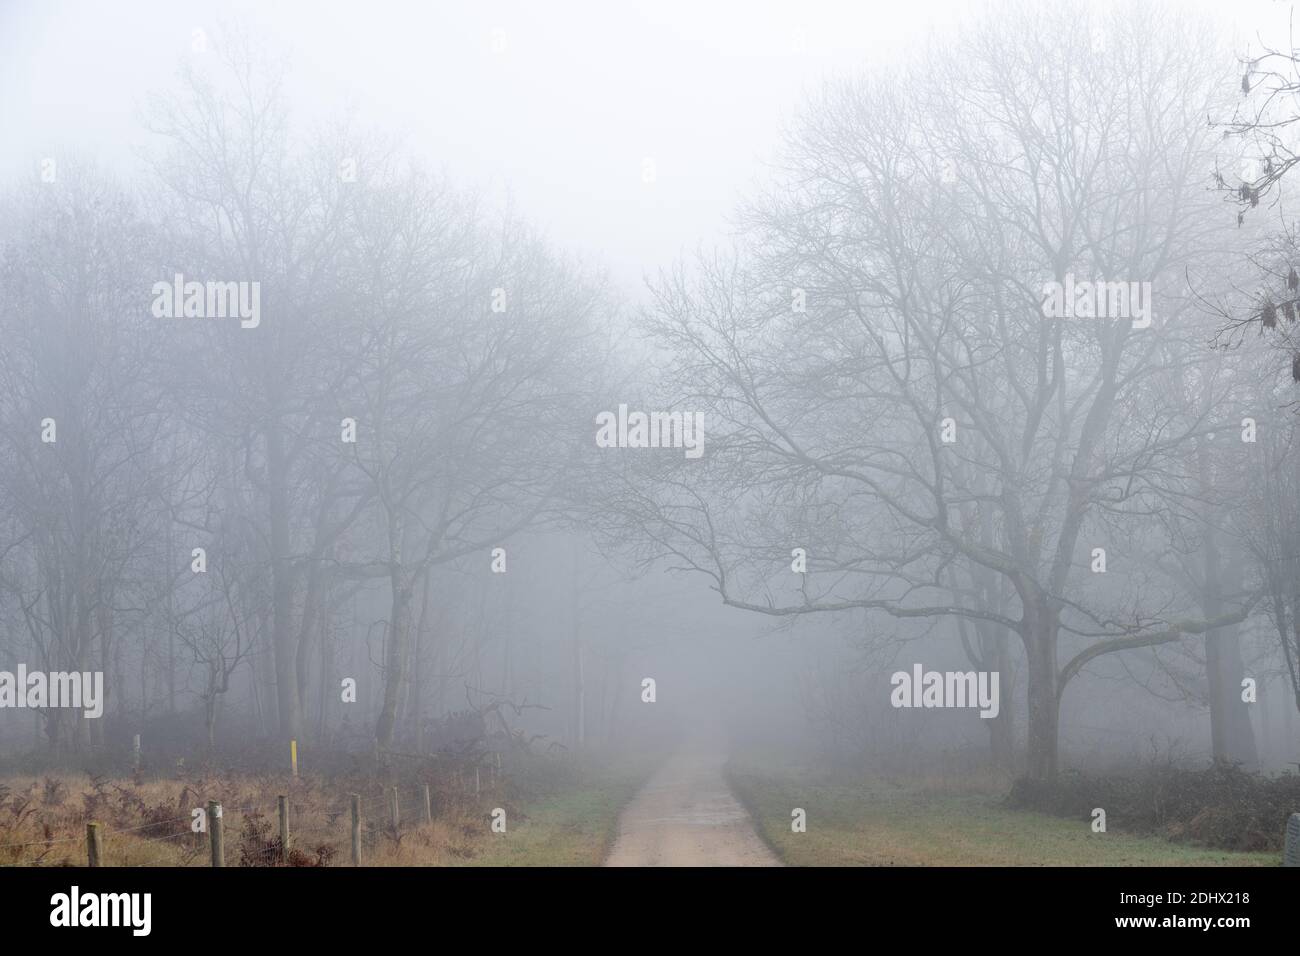 Straight road through mist to forest with ghostly trees in distance feeling lost Stock Photo